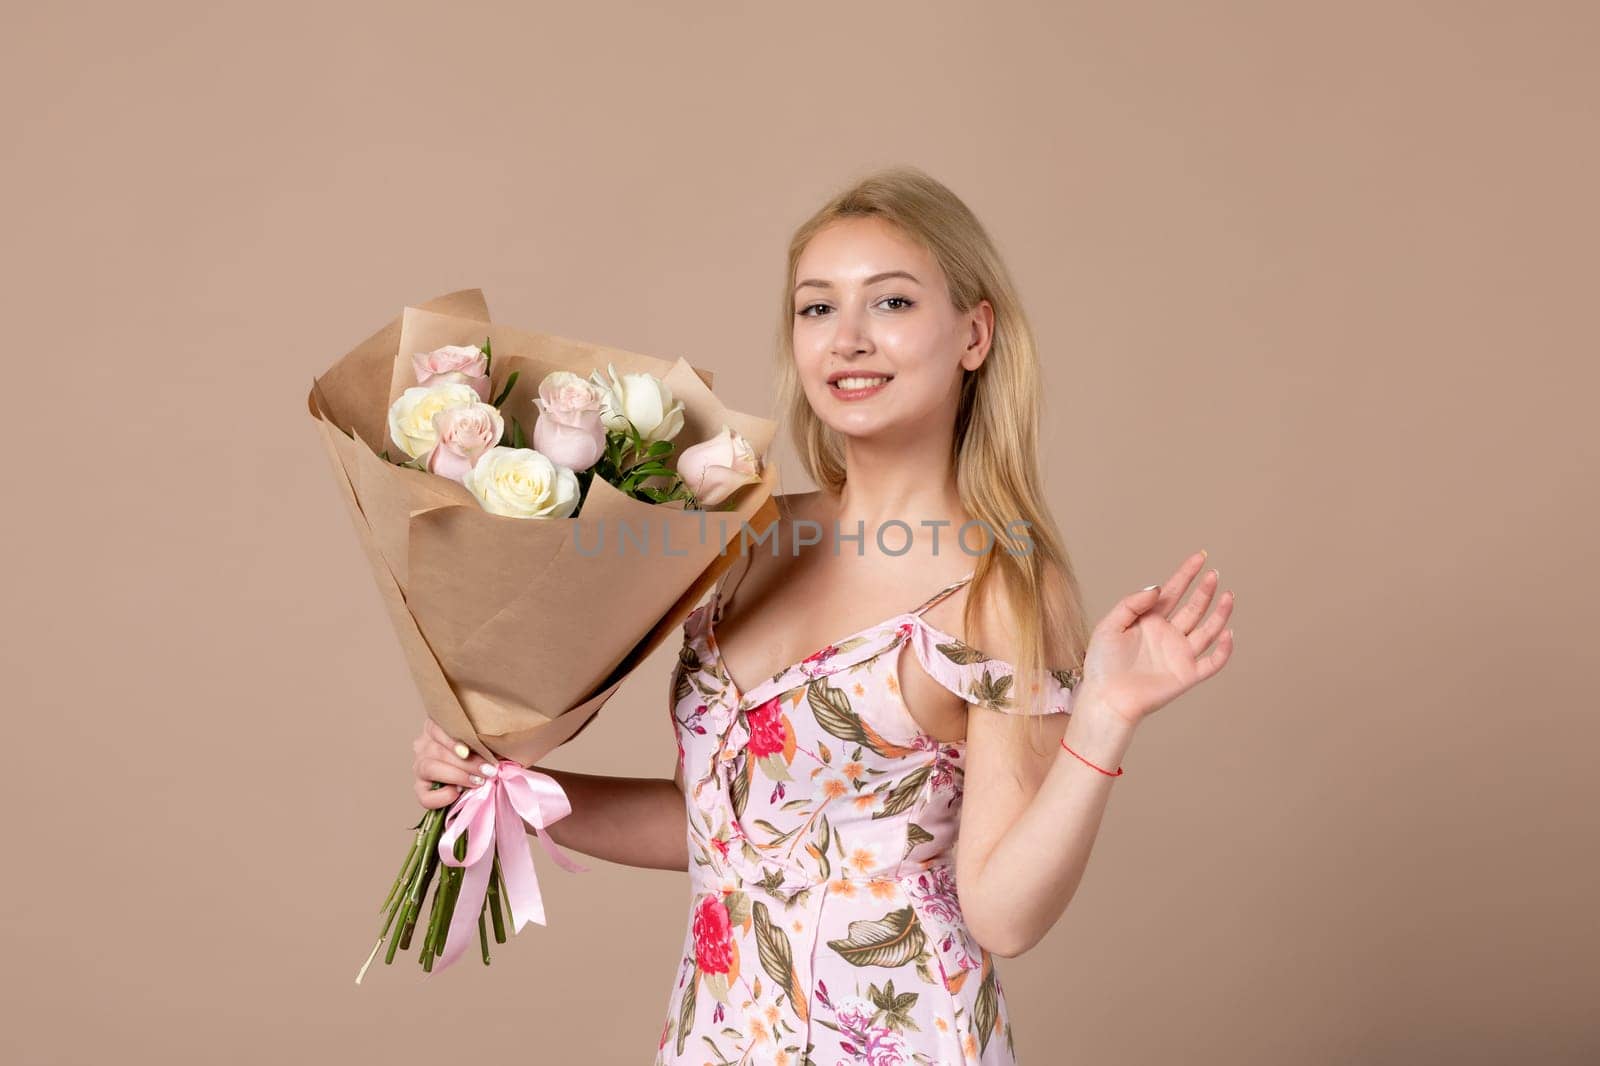 front view young female posing with bouquet of beautiful roses on brown background feminine sensual woman horizontal march marriage equality by Kamran